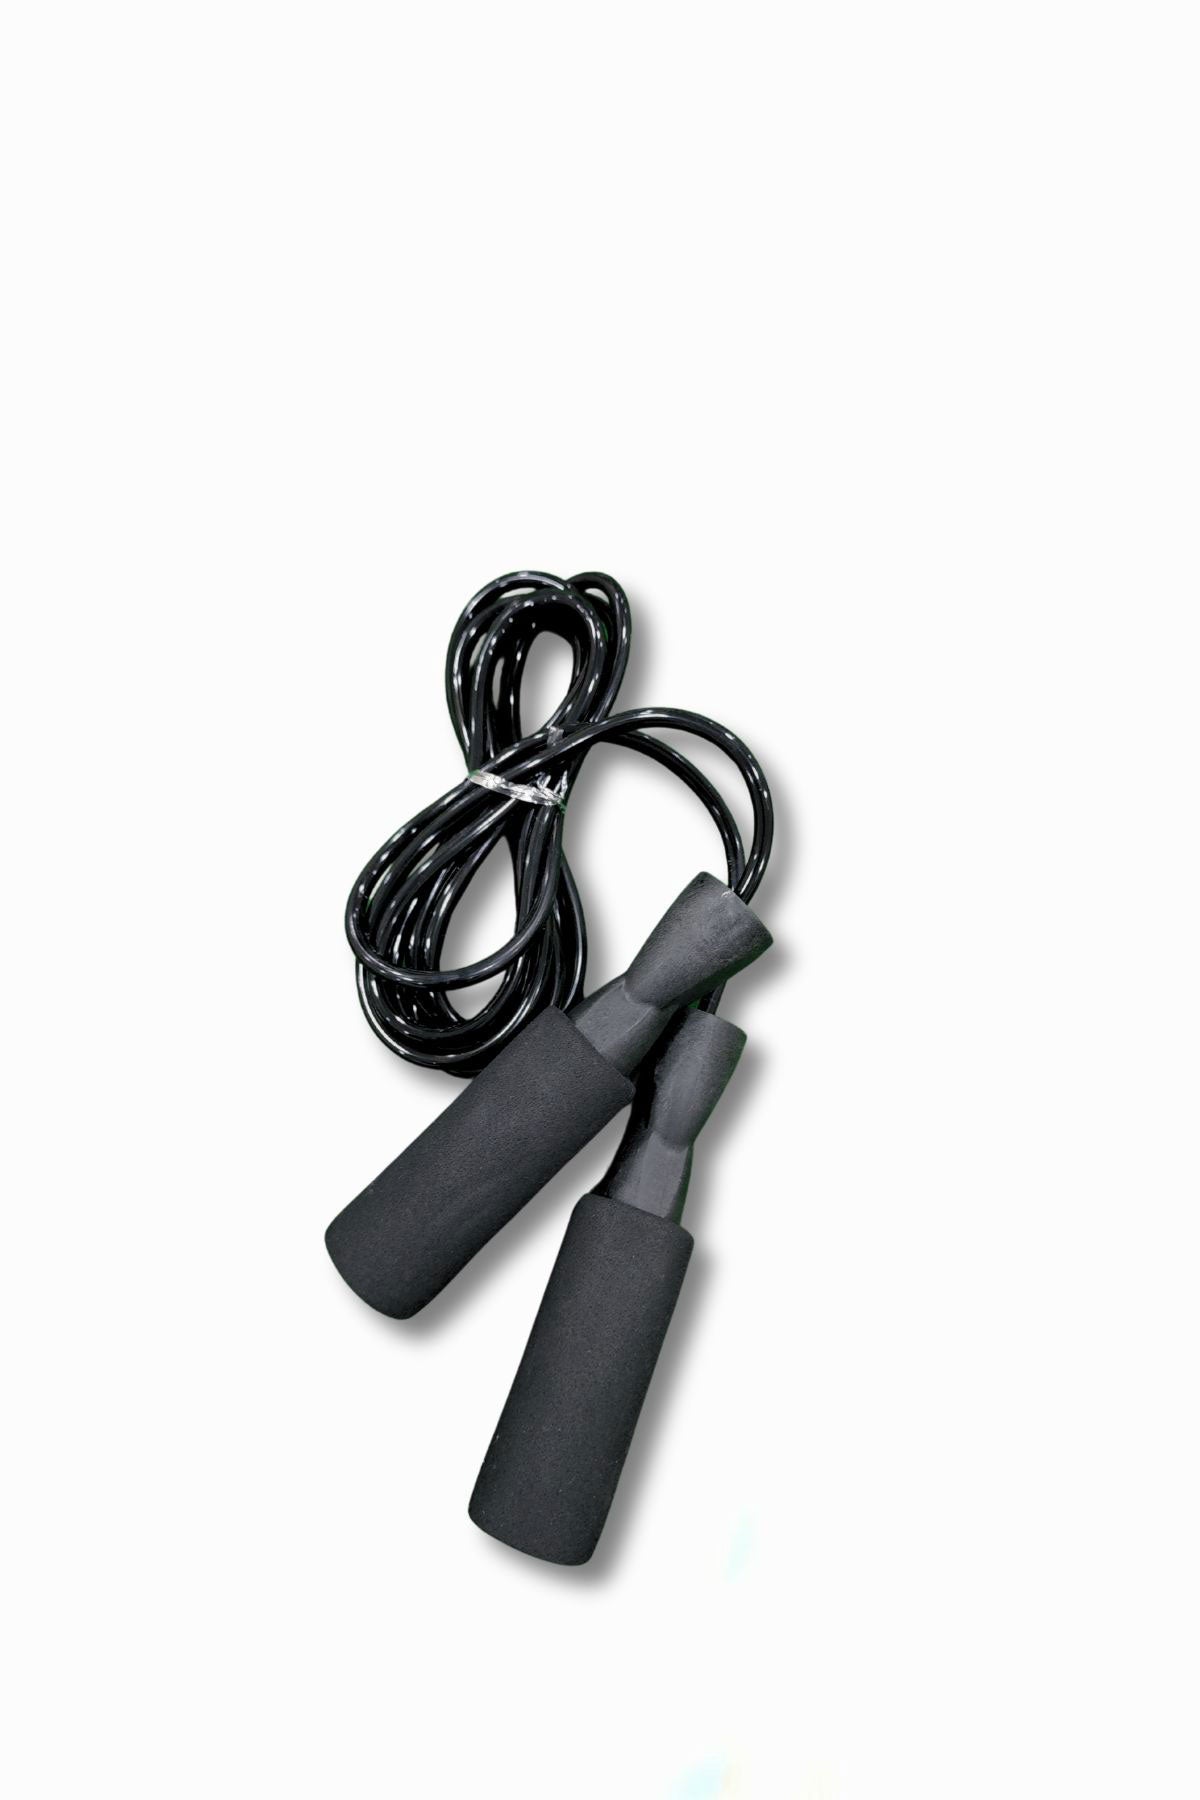 AMPLIFY SKIPPING ROPE- ULTRA BLACK - The Orion Fit